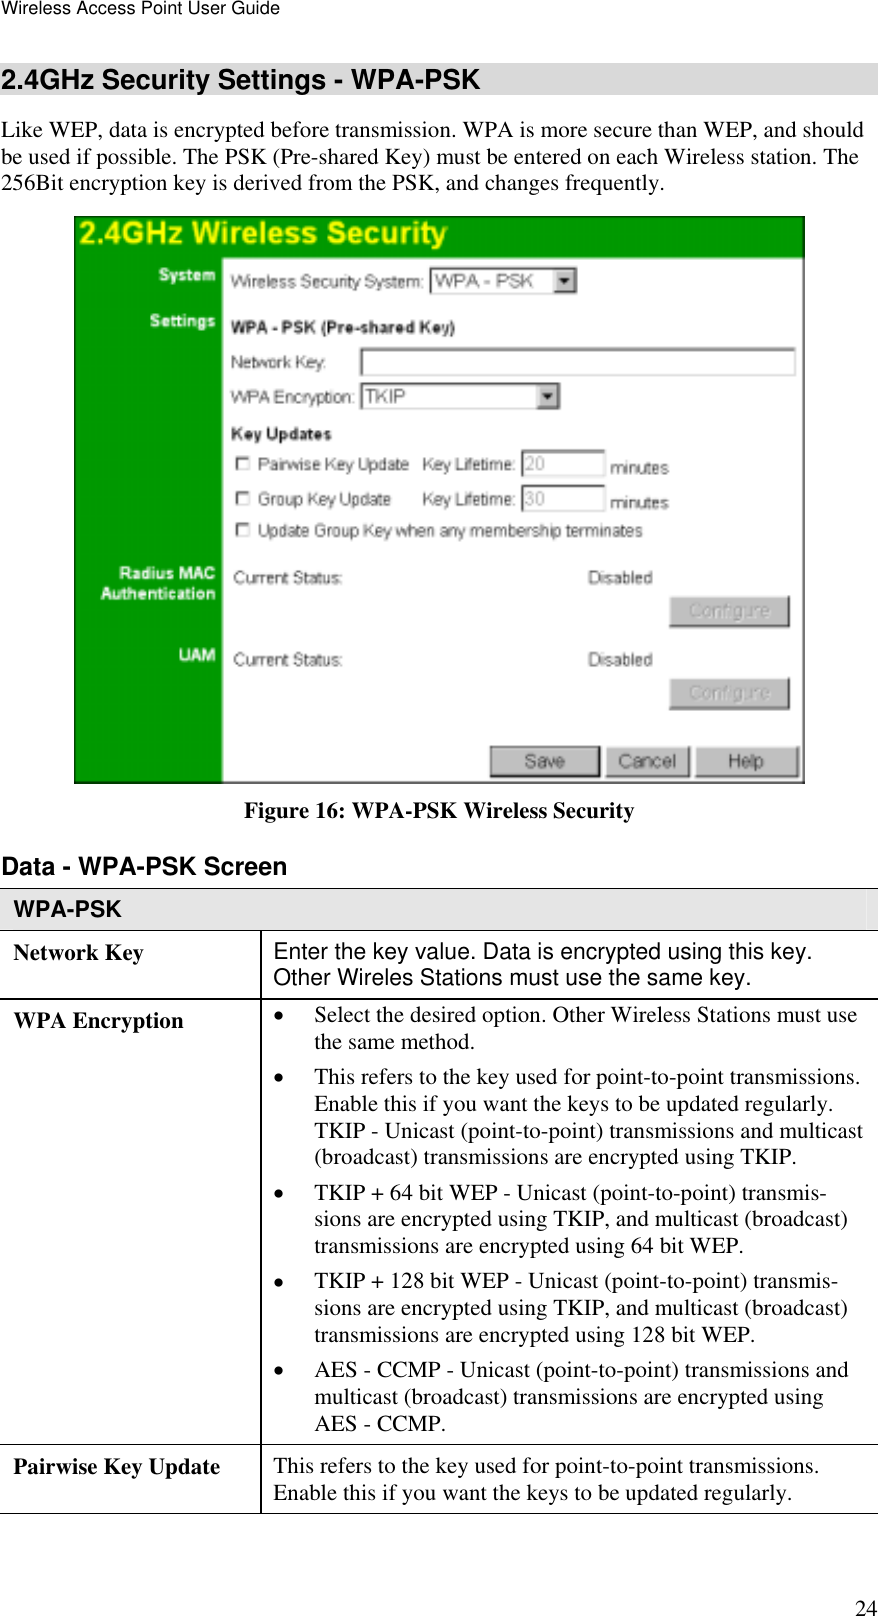 Wireless Access Point User Guide 24 2.4GHz Security Settings - WPA-PSK Like WEP, data is encrypted before transmission. WPA is more secure than WEP, and should be used if possible. The PSK (Pre-shared Key) must be entered on each Wireless station. The 256Bit encryption key is derived from the PSK, and changes frequently.  Figure 16: WPA-PSK Wireless Security Data - WPA-PSK Screen  WPA-PSK Network Key  Enter the key value. Data is encrypted using this key. Other Wireles Stations must use the same key. WPA Encryption  •  Select the desired option. Other Wireless Stations must use the same method. •  This refers to the key used for point-to-point transmissions. Enable this if you want the keys to be updated regularly. TKIP - Unicast (point-to-point) transmissions and multicast (broadcast) transmissions are encrypted using TKIP.  •  TKIP + 64 bit WEP - Unicast (point-to-point) transmis-sions are encrypted using TKIP, and multicast (broadcast) transmissions are encrypted using 64 bit WEP.  •  TKIP + 128 bit WEP - Unicast (point-to-point) transmis-sions are encrypted using TKIP, and multicast (broadcast) transmissions are encrypted using 128 bit WEP.  •  AES - CCMP - Unicast (point-to-point) transmissions and multicast (broadcast) transmissions are encrypted using AES - CCMP. Pairwise Key Update  This refers to the key used for point-to-point transmissions. Enable this if you want the keys to be updated regularly. 